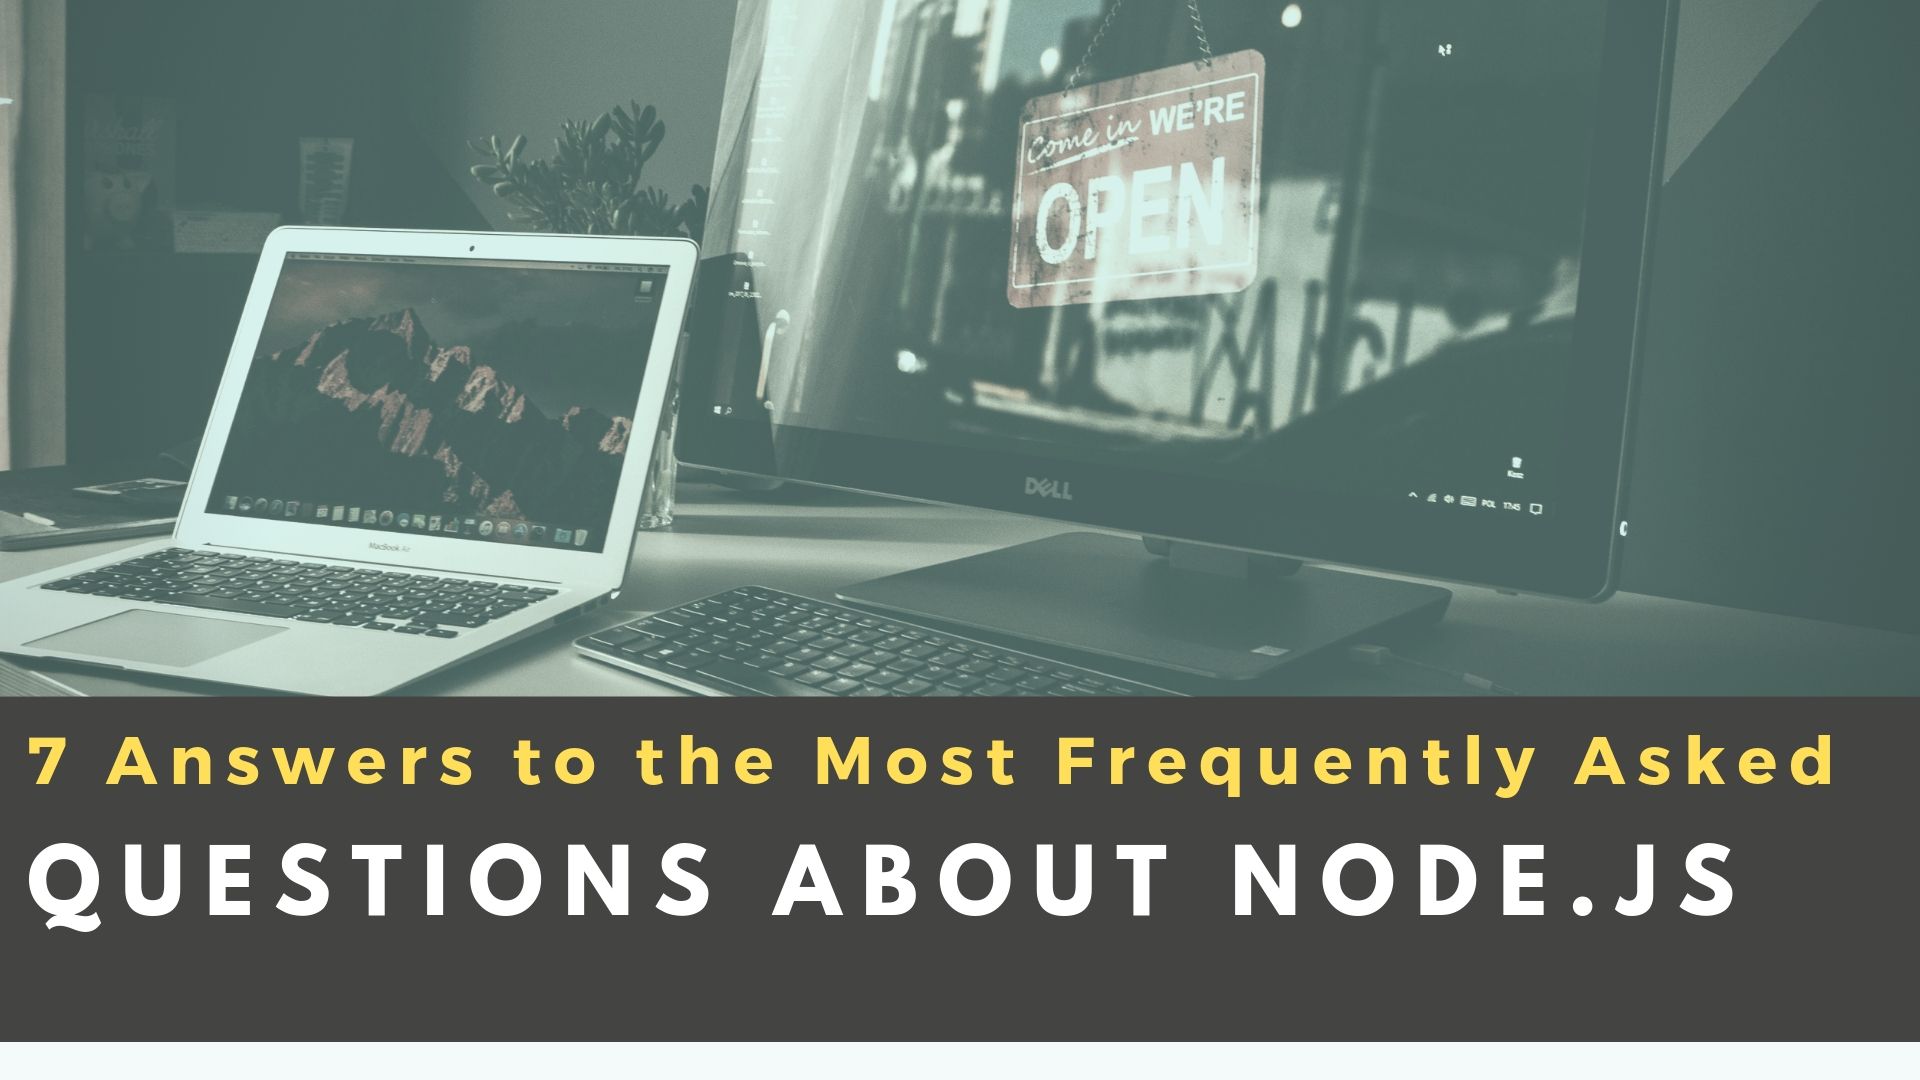 7 Answers to the Most Frequently Asked Questions About NodeJS